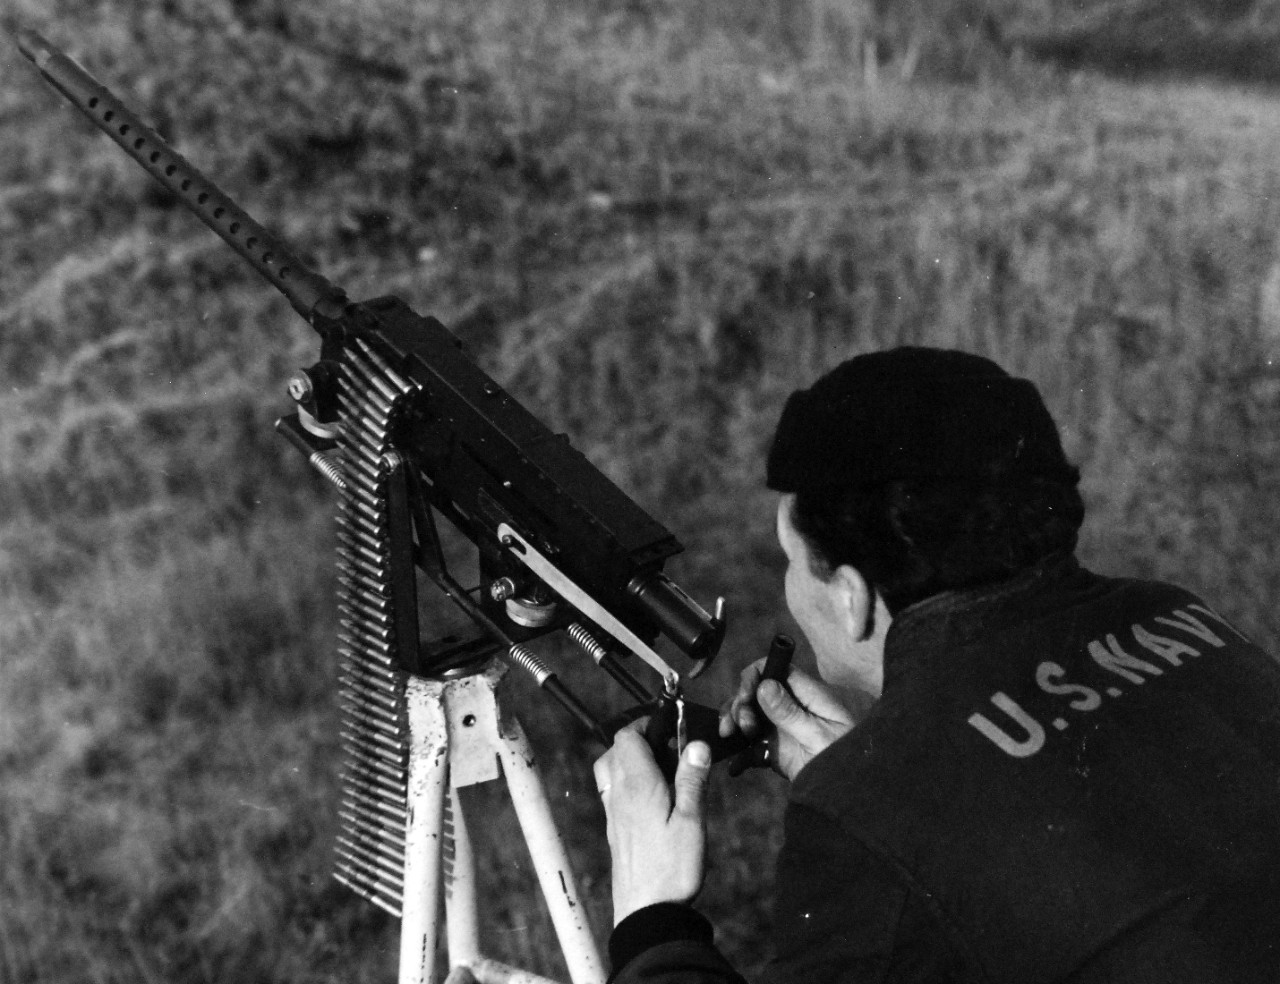 80-G-279813:  U.S. Naval Air Station, Kodiak, Alaska, 1944.   AOM1/C J.C. Mazzie performing fixed test firing of a mount devised by the Petty Officer while at the air station..  The 30 cal. Machine gun mount permits easy test firing.  Photographed by PhoM1/C J.E. Martin, November 6, 1944.  U.S. Navy Photograph now in the collections of the National Archives.  (2016/01/19).